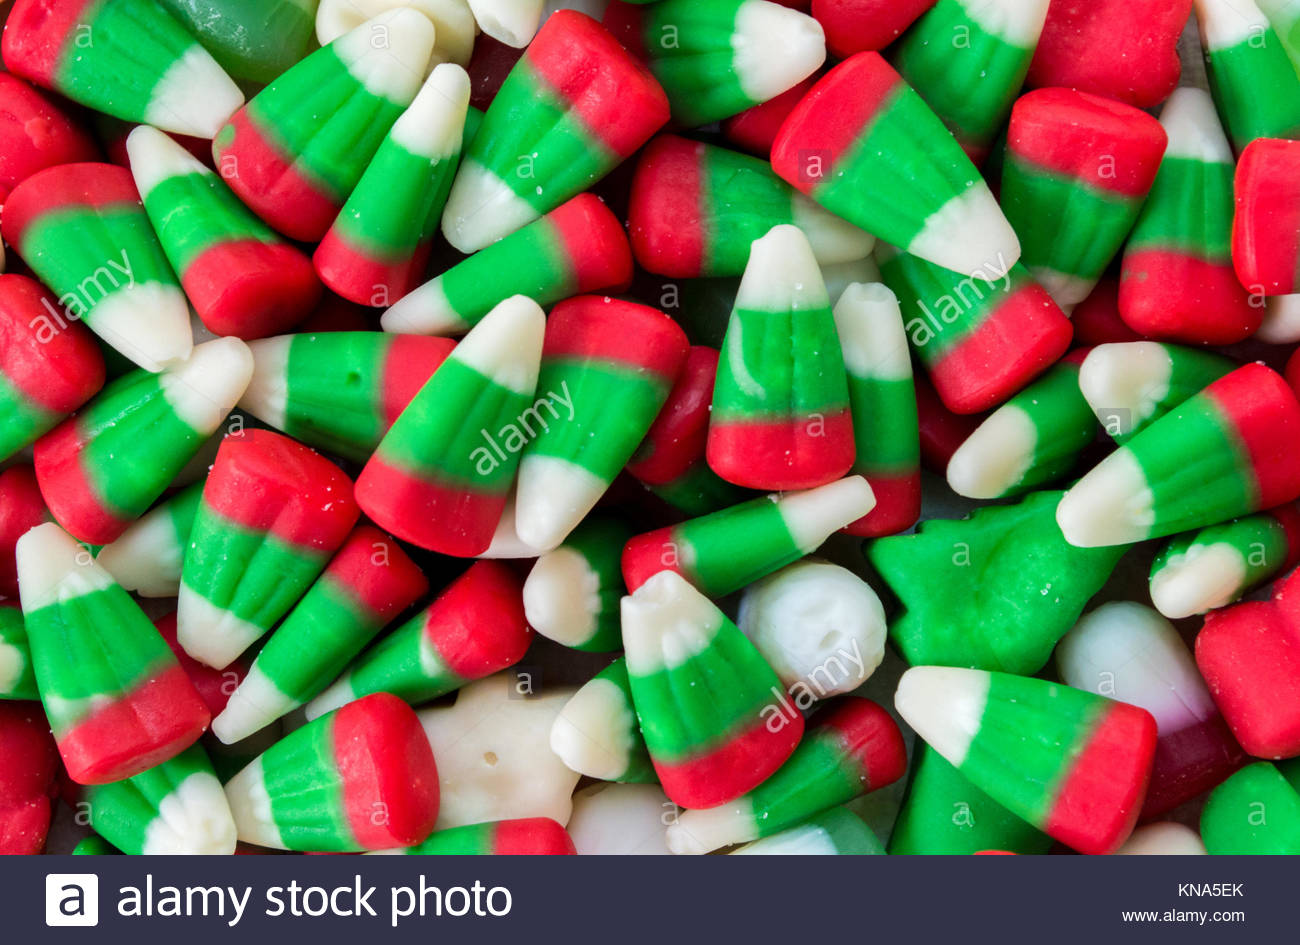 background wallpaper red green and white Christmas candy corn